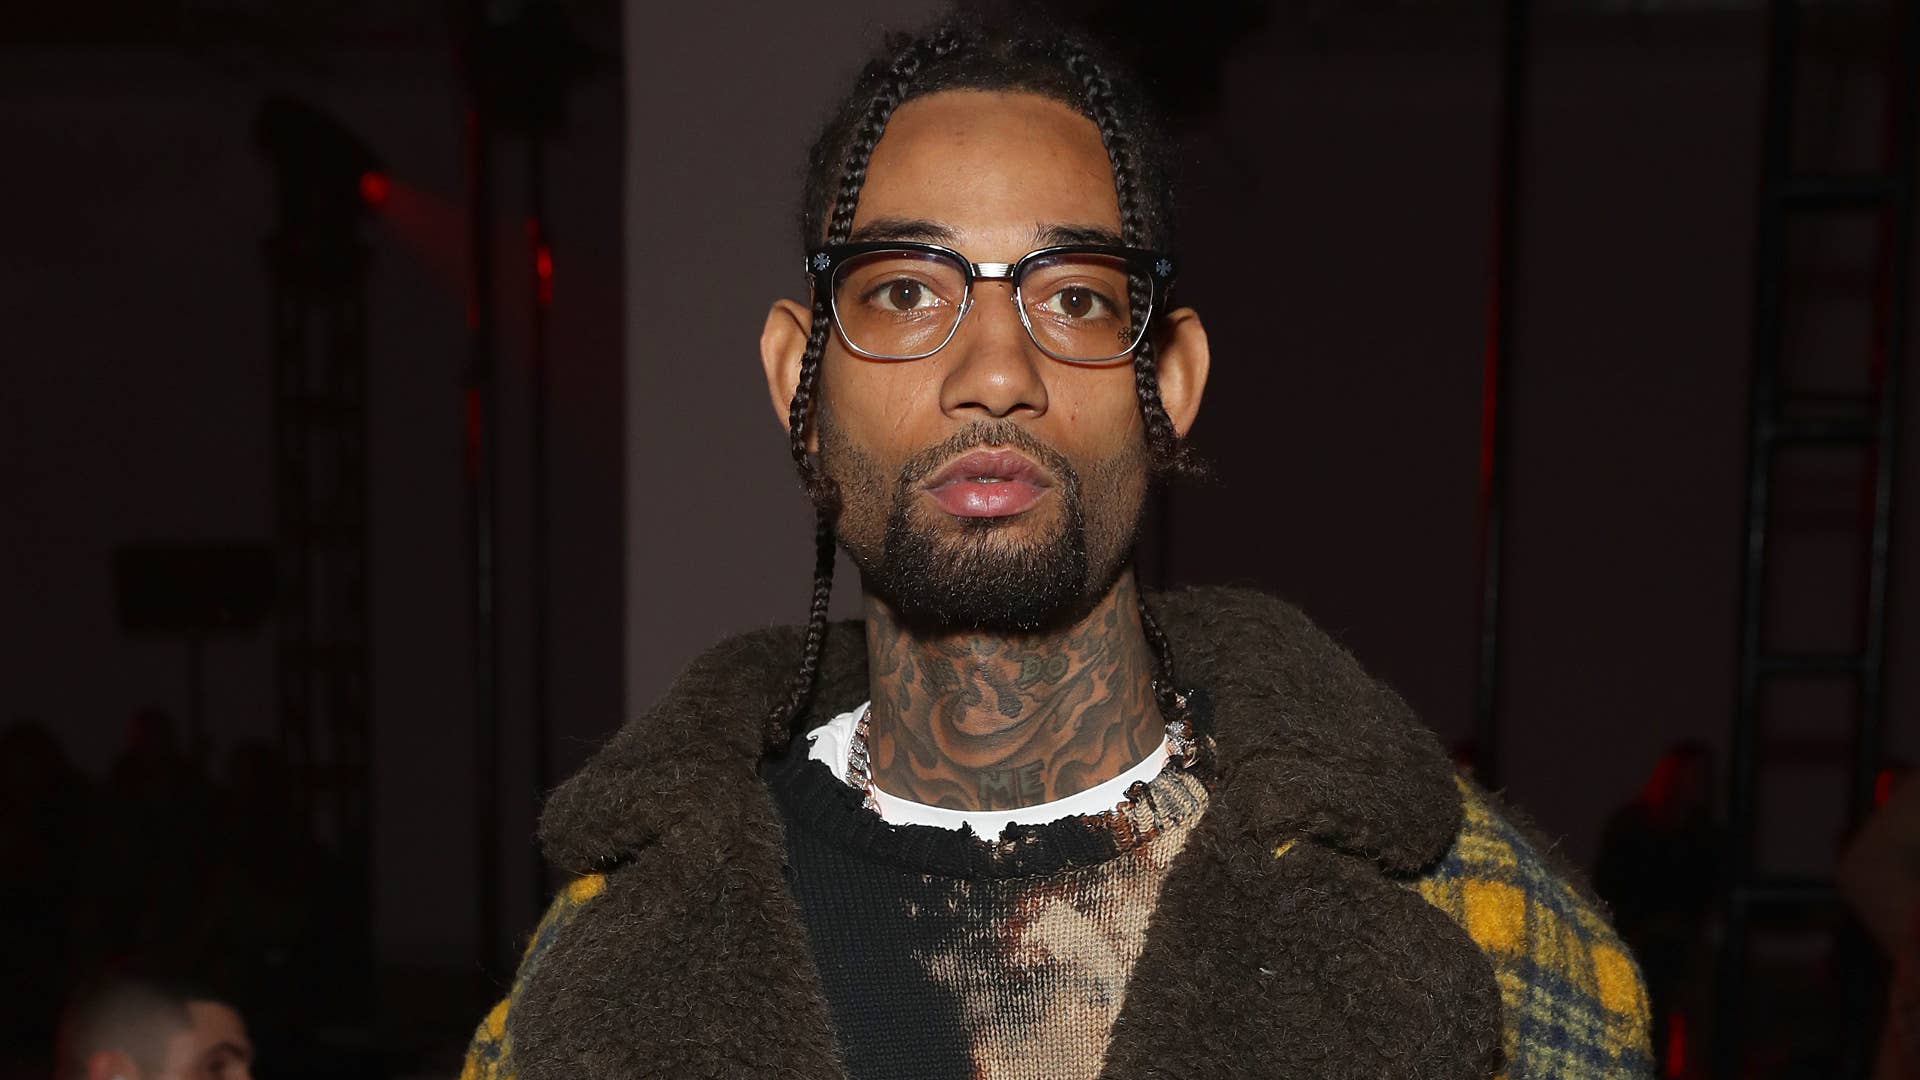 PnB Rock is pictured at an event in 2020